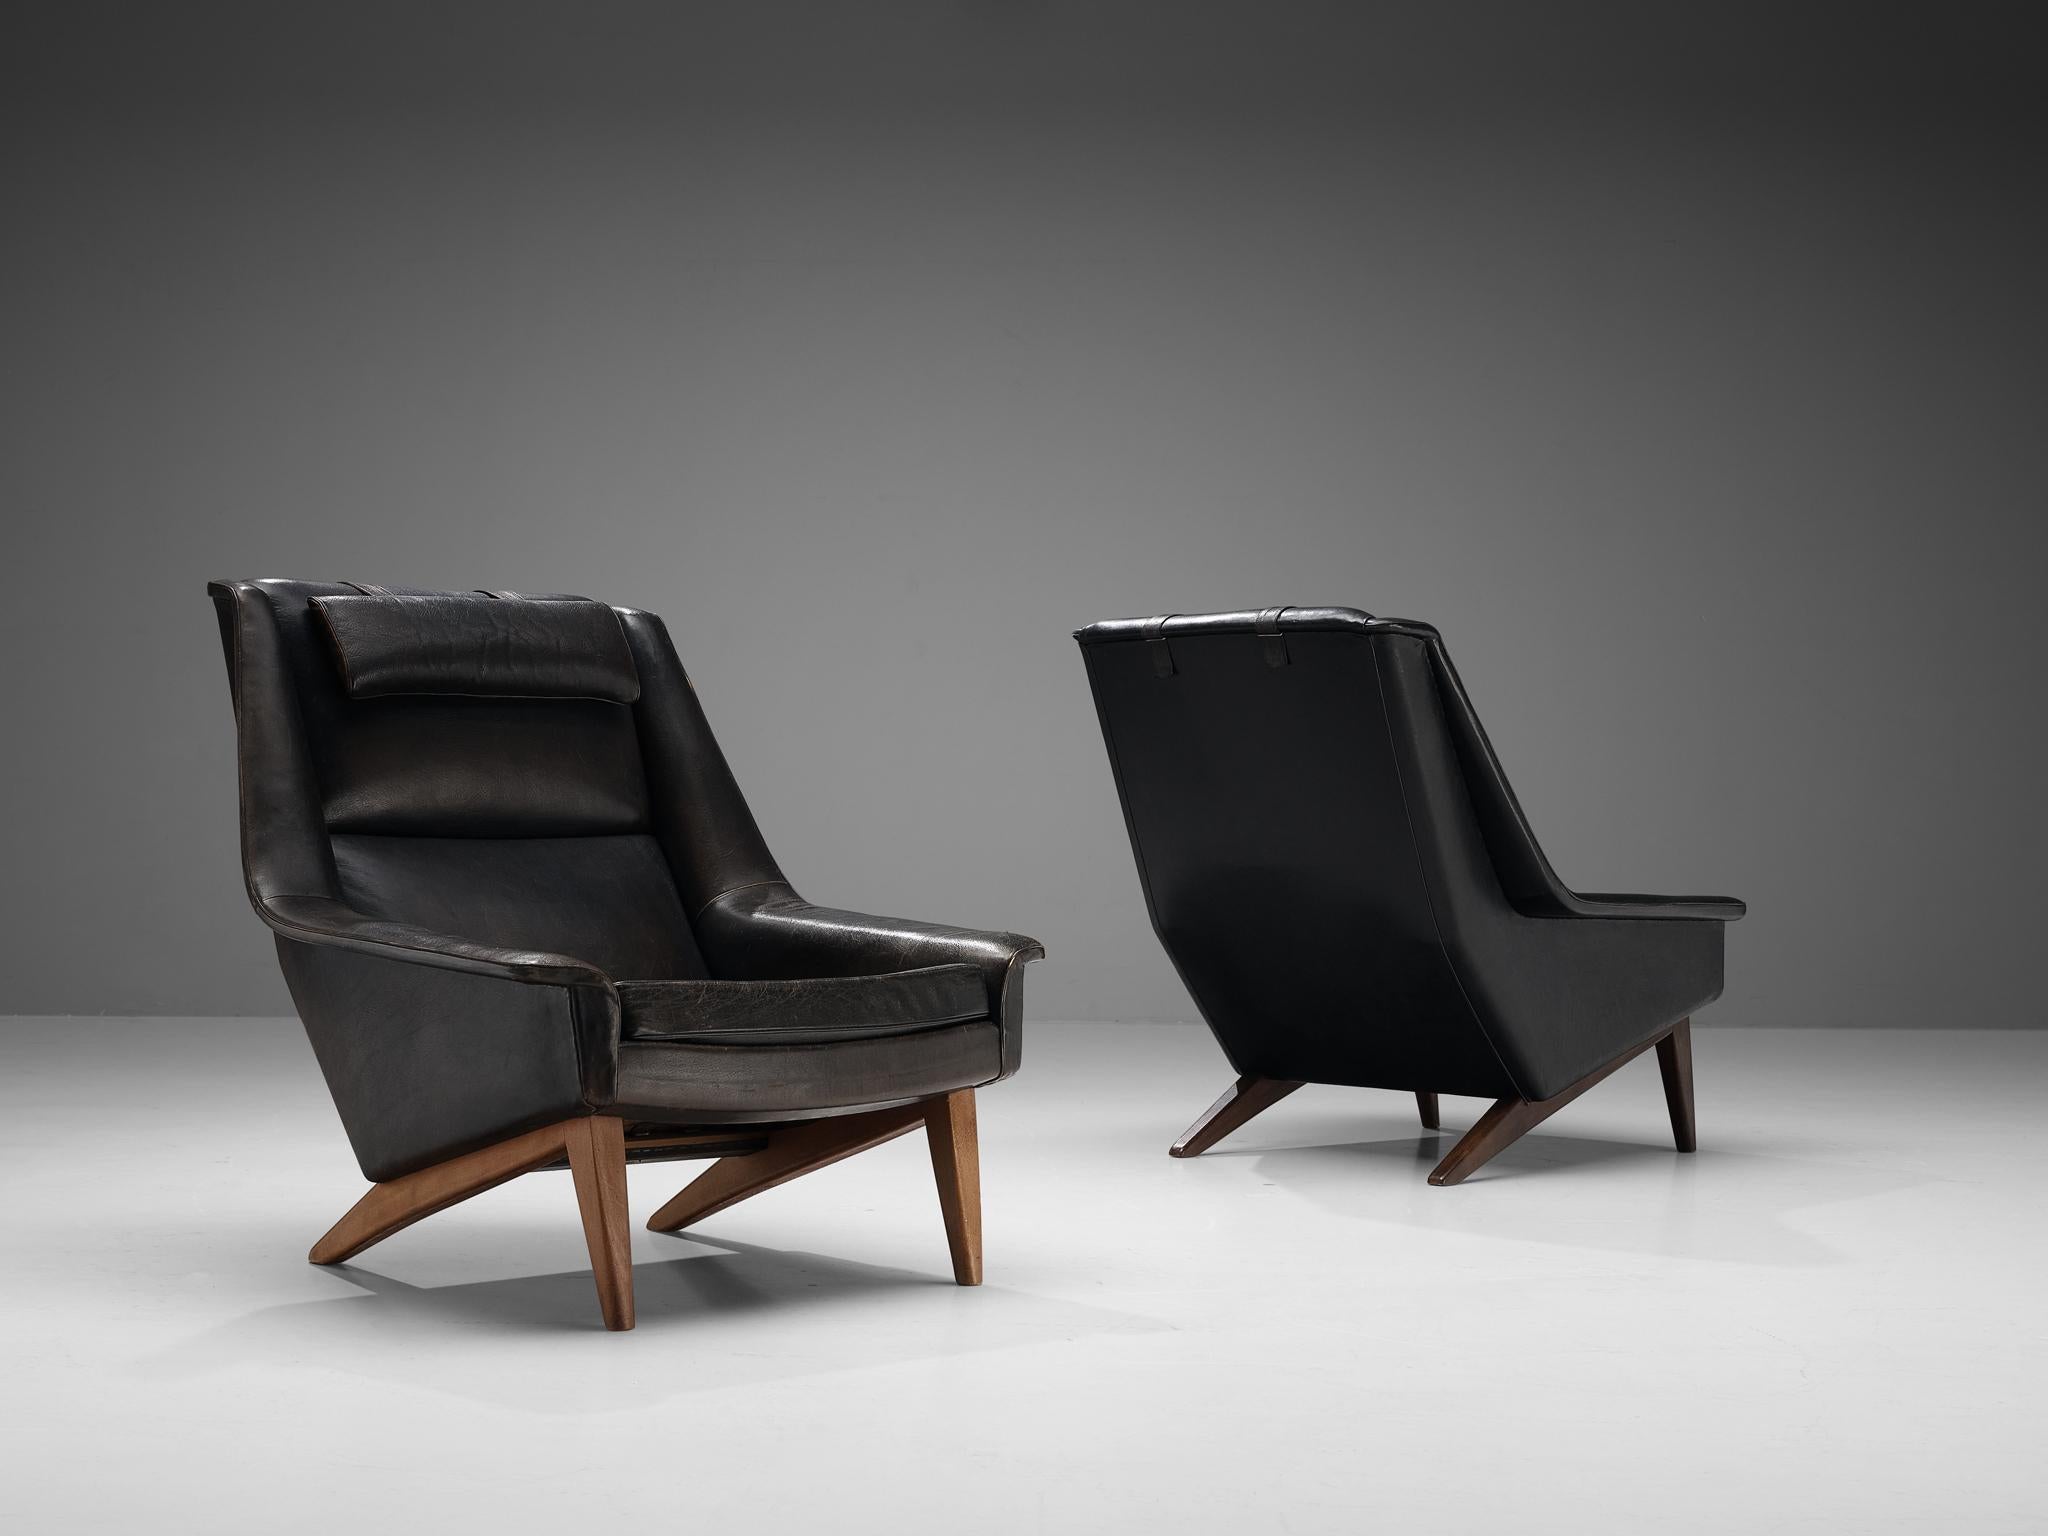 Folke Ohlsson for Fritz Hansen, pair of easy chairs, model '4410', in any preferred leather of fabric, beech, Denmark, designed in 1957

These high quality lounge chairs are characterized by a stylish timeless design based on elegant shapes and